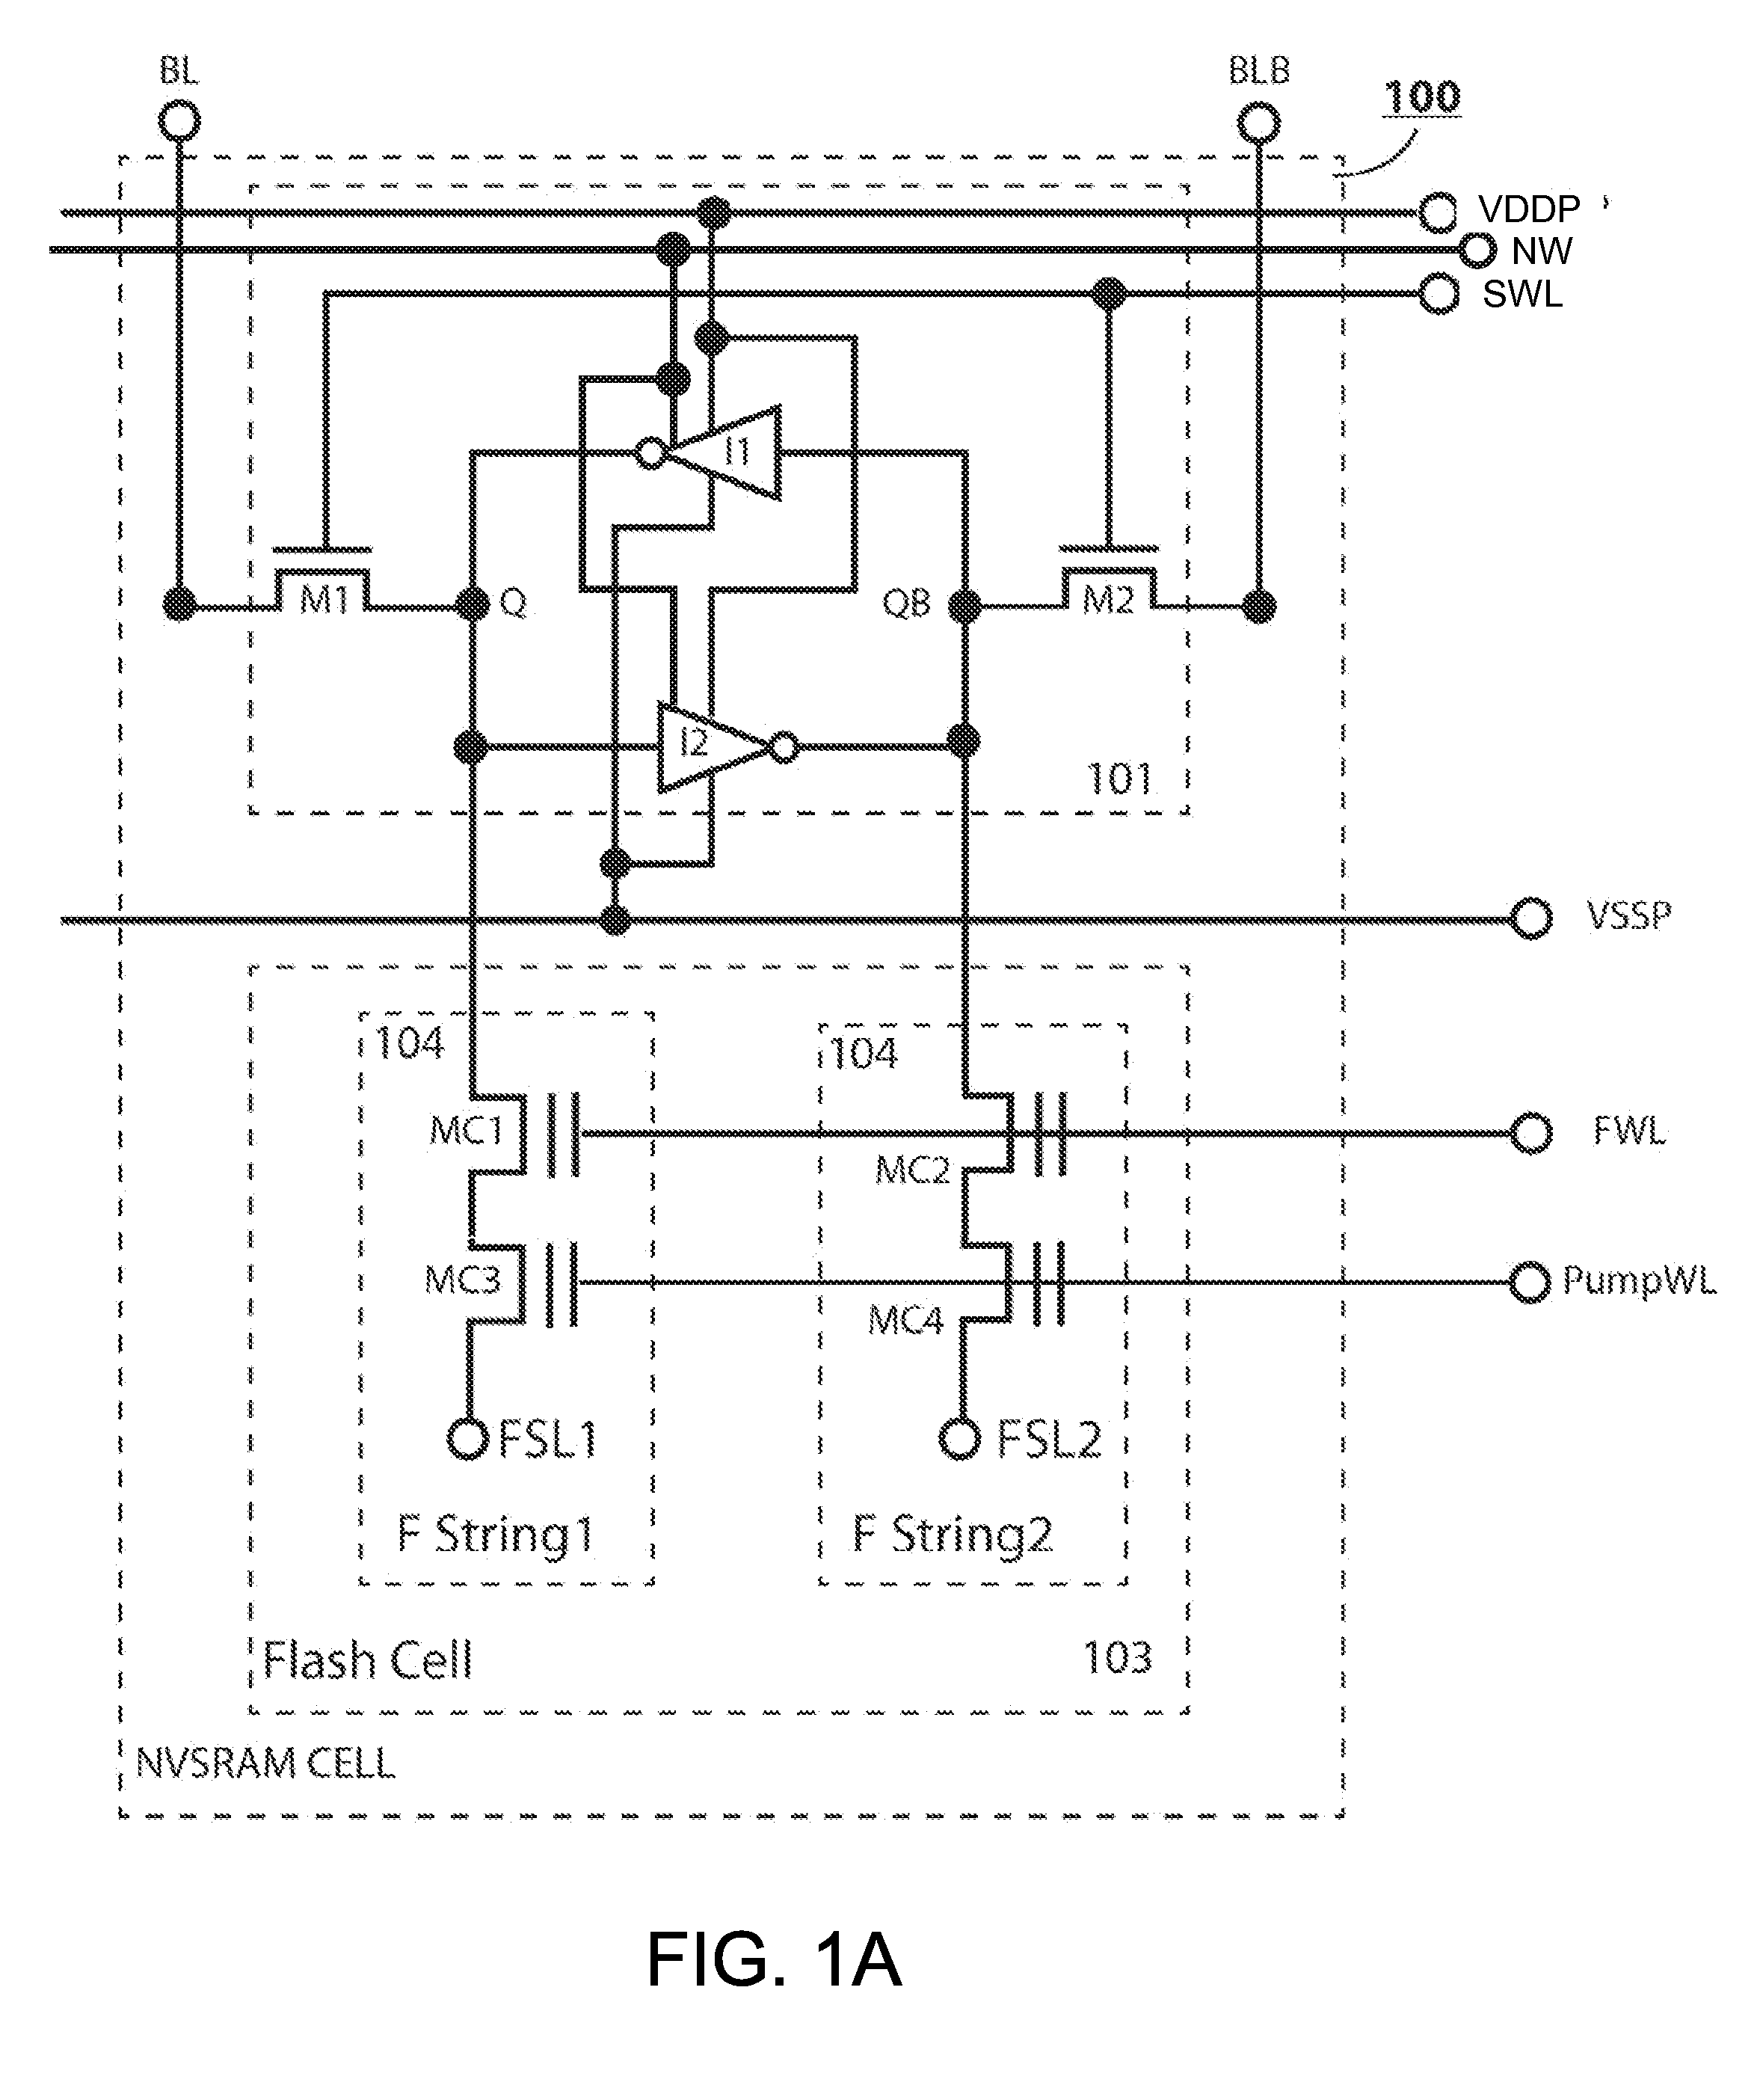 Pseudo-8t nvsram cell with a charge-follower